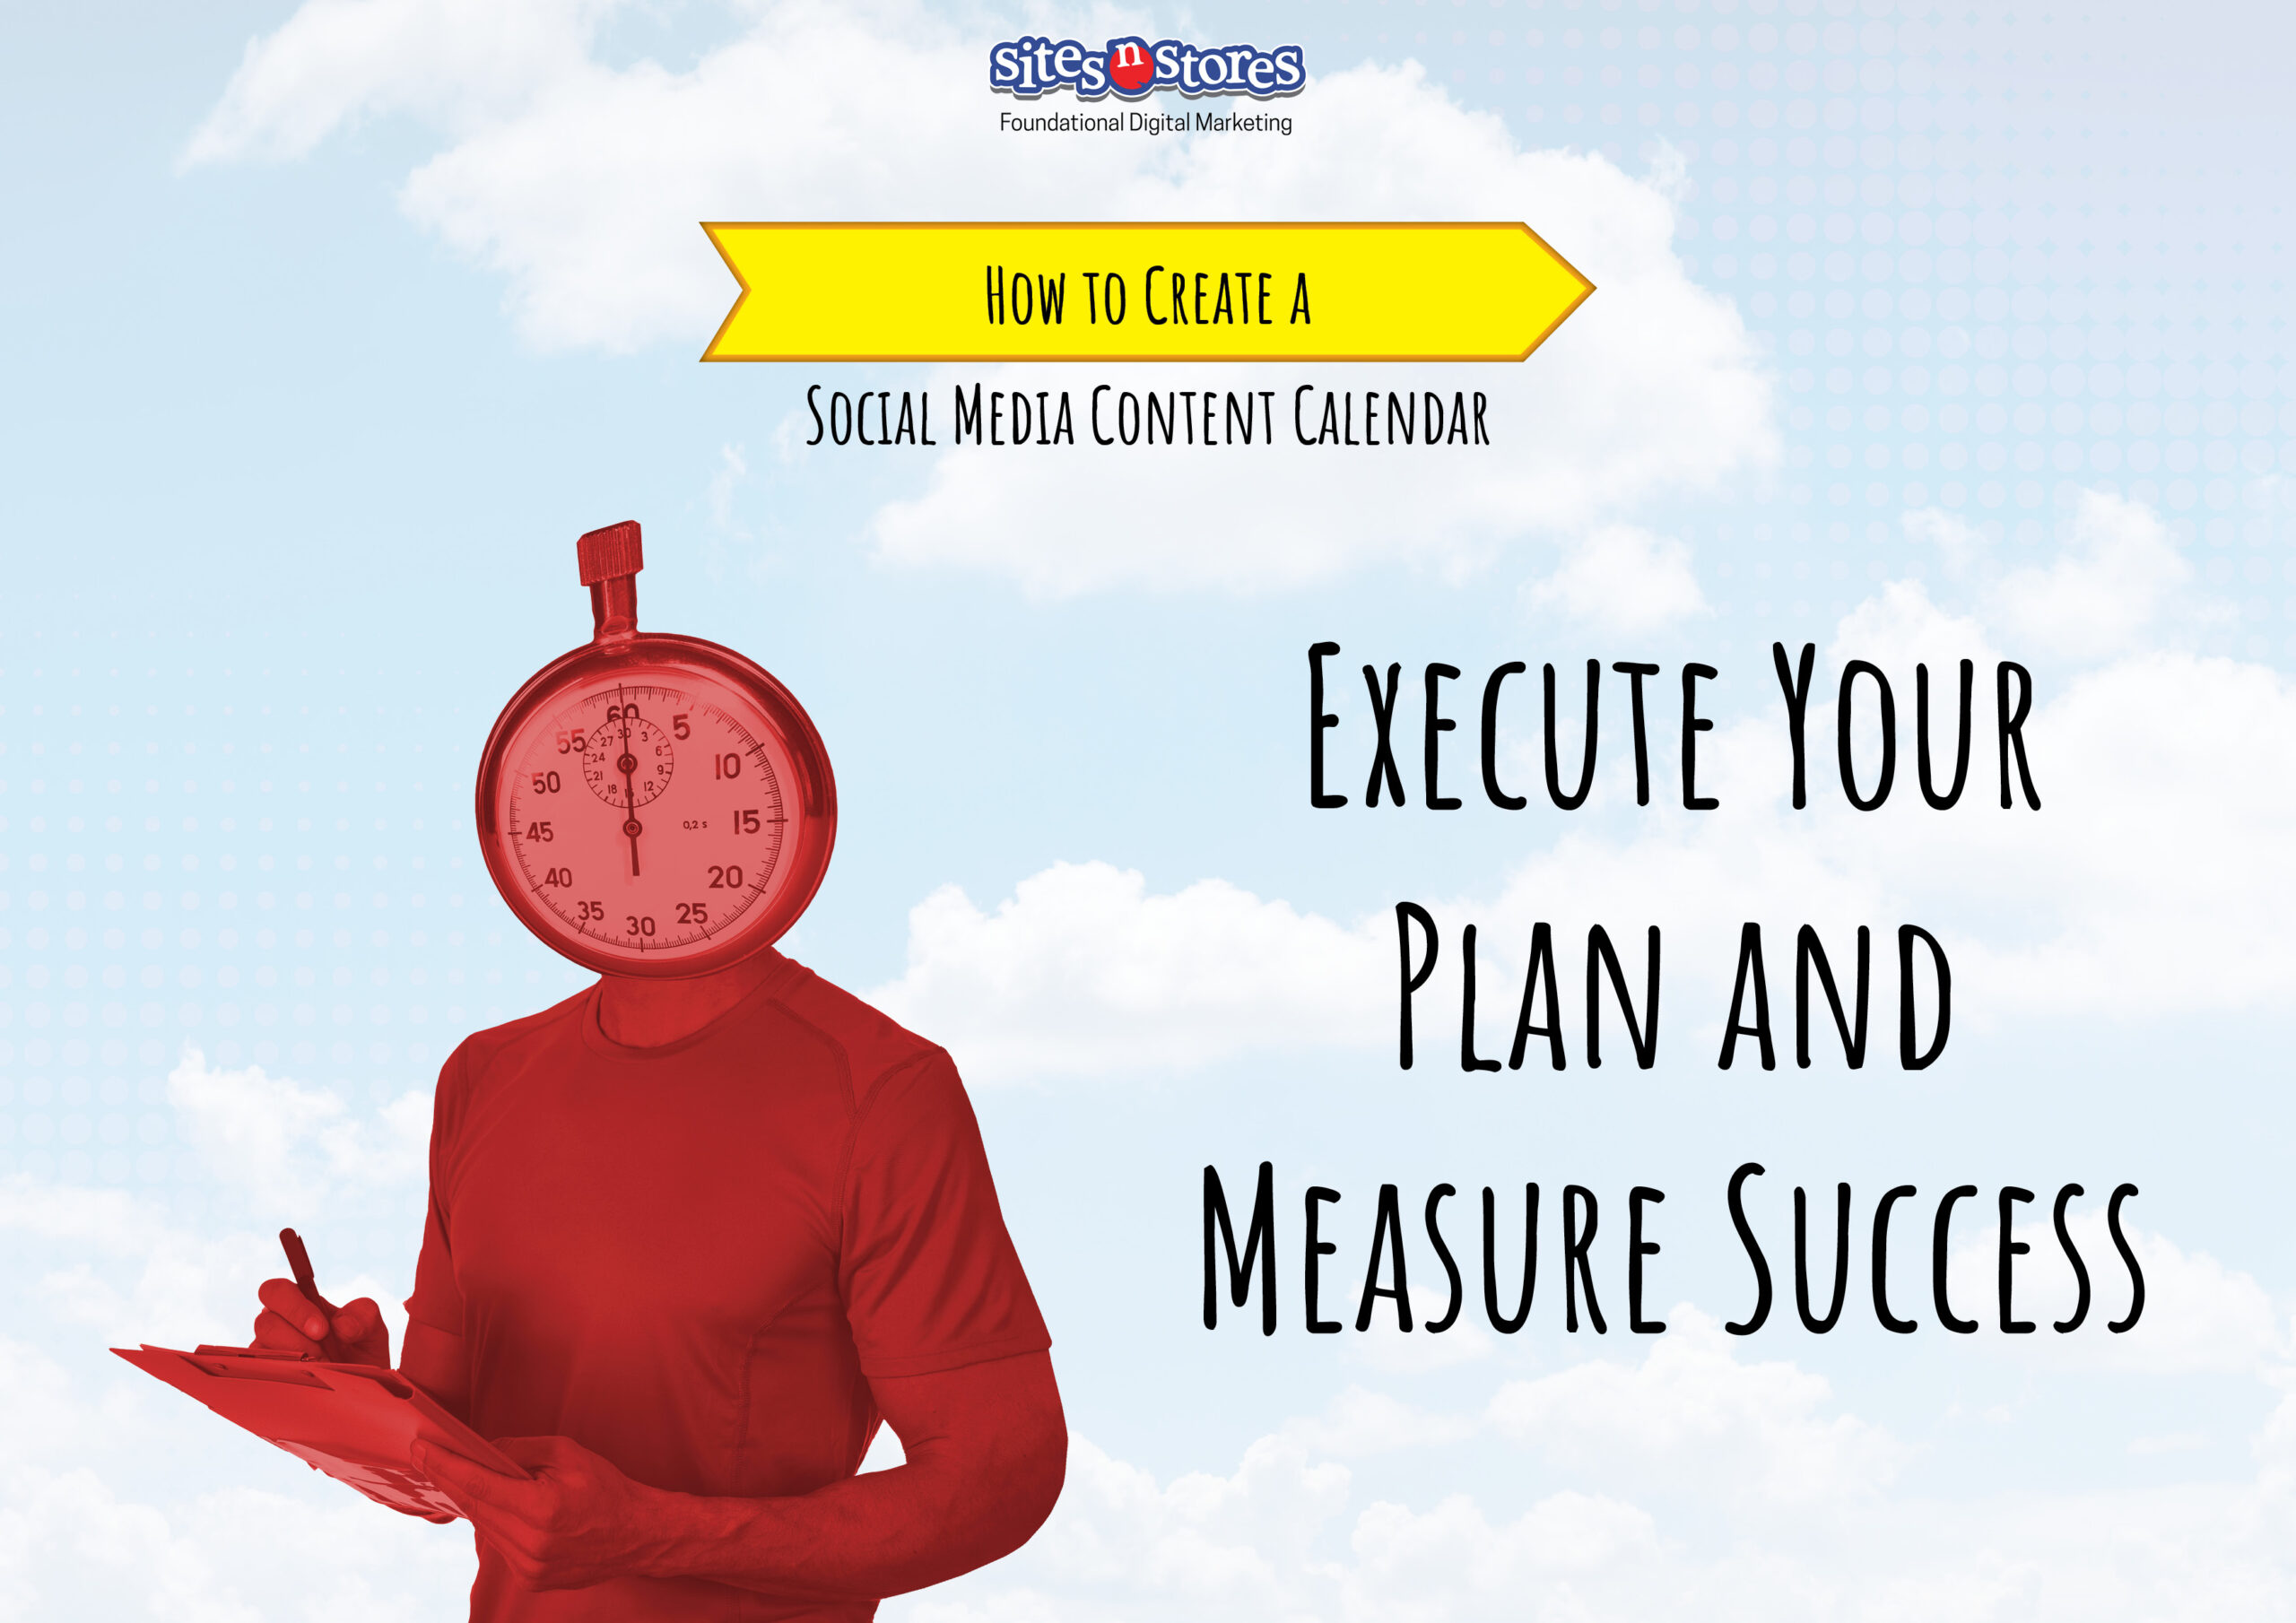 Execute Your Plan and Measure Success